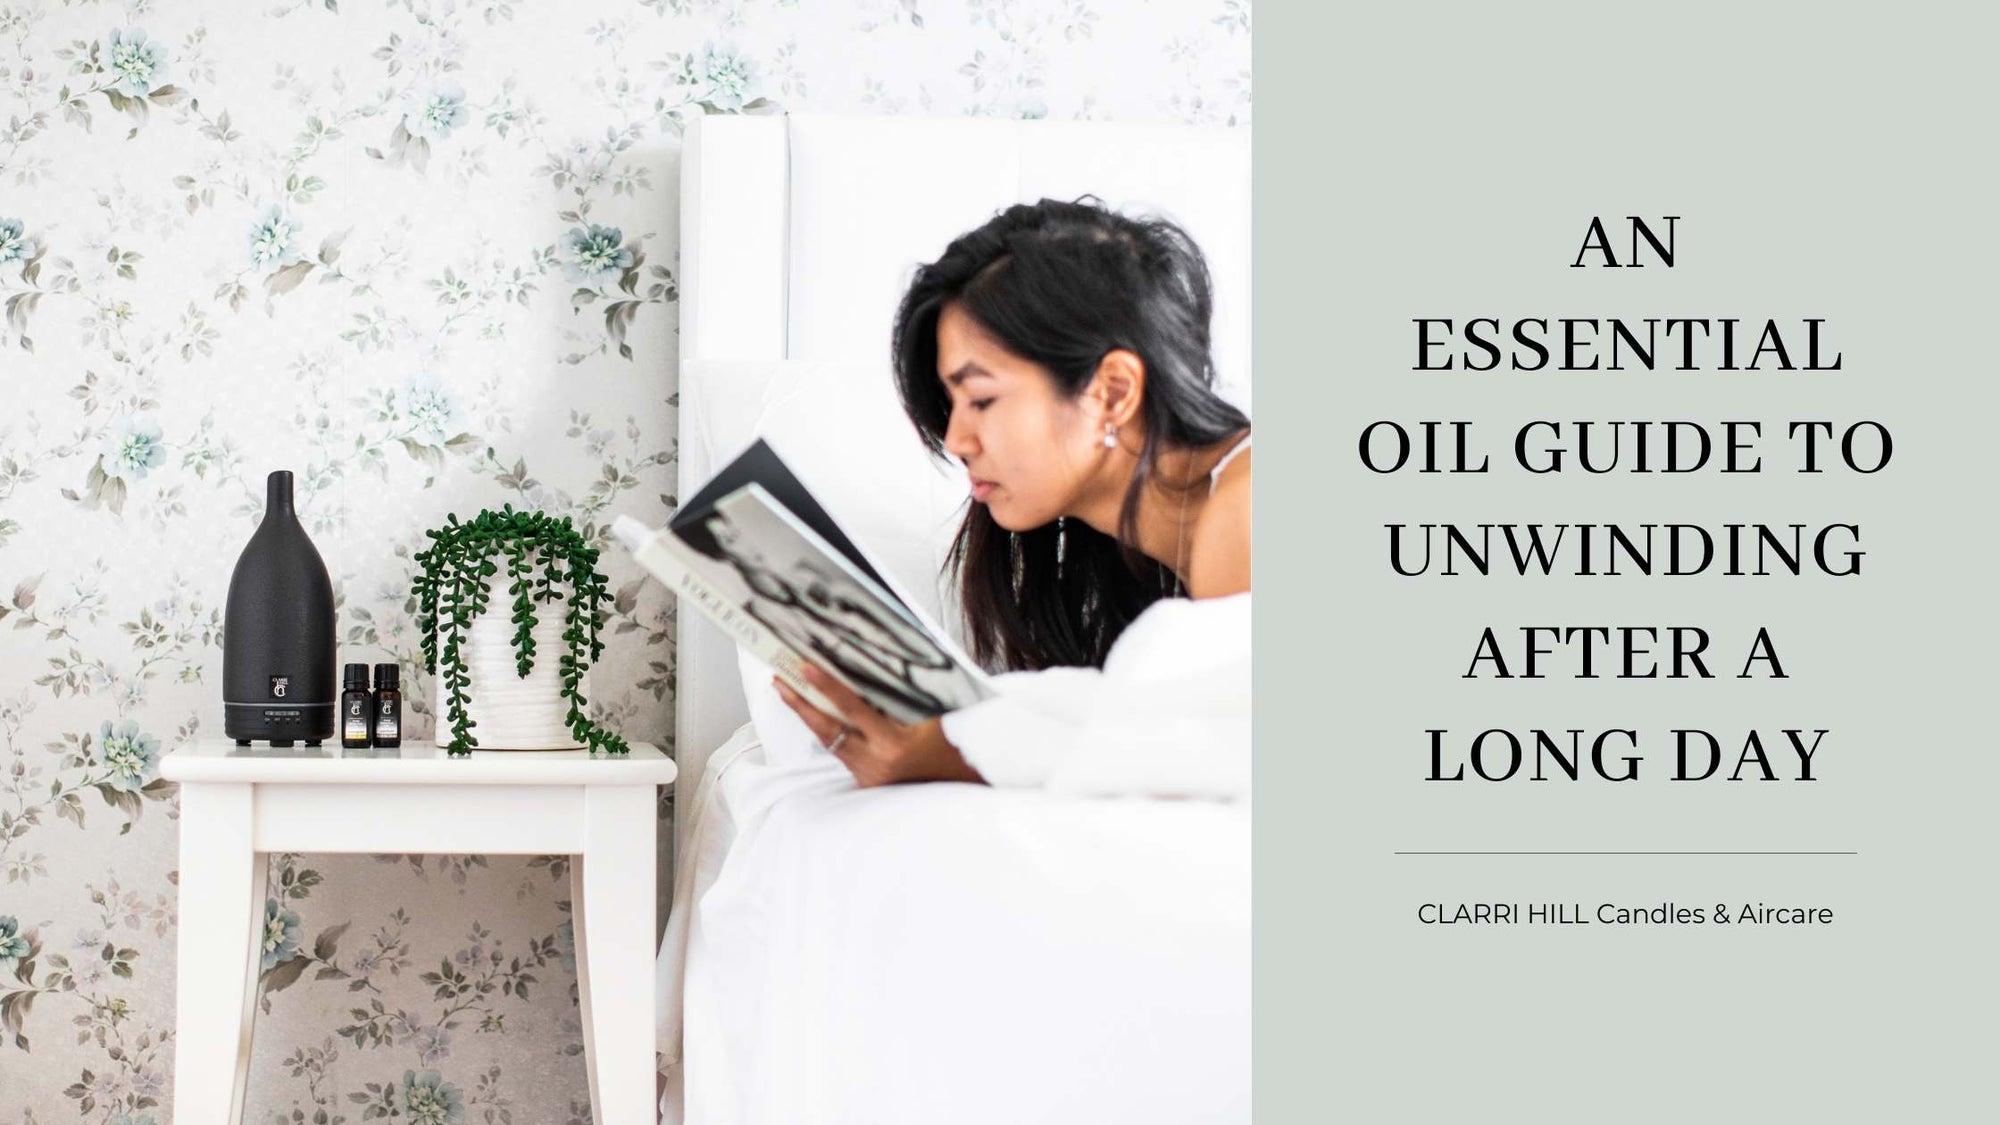 An Essential Oil Guide to Unwinding After a Long Day | CLARRI HILL